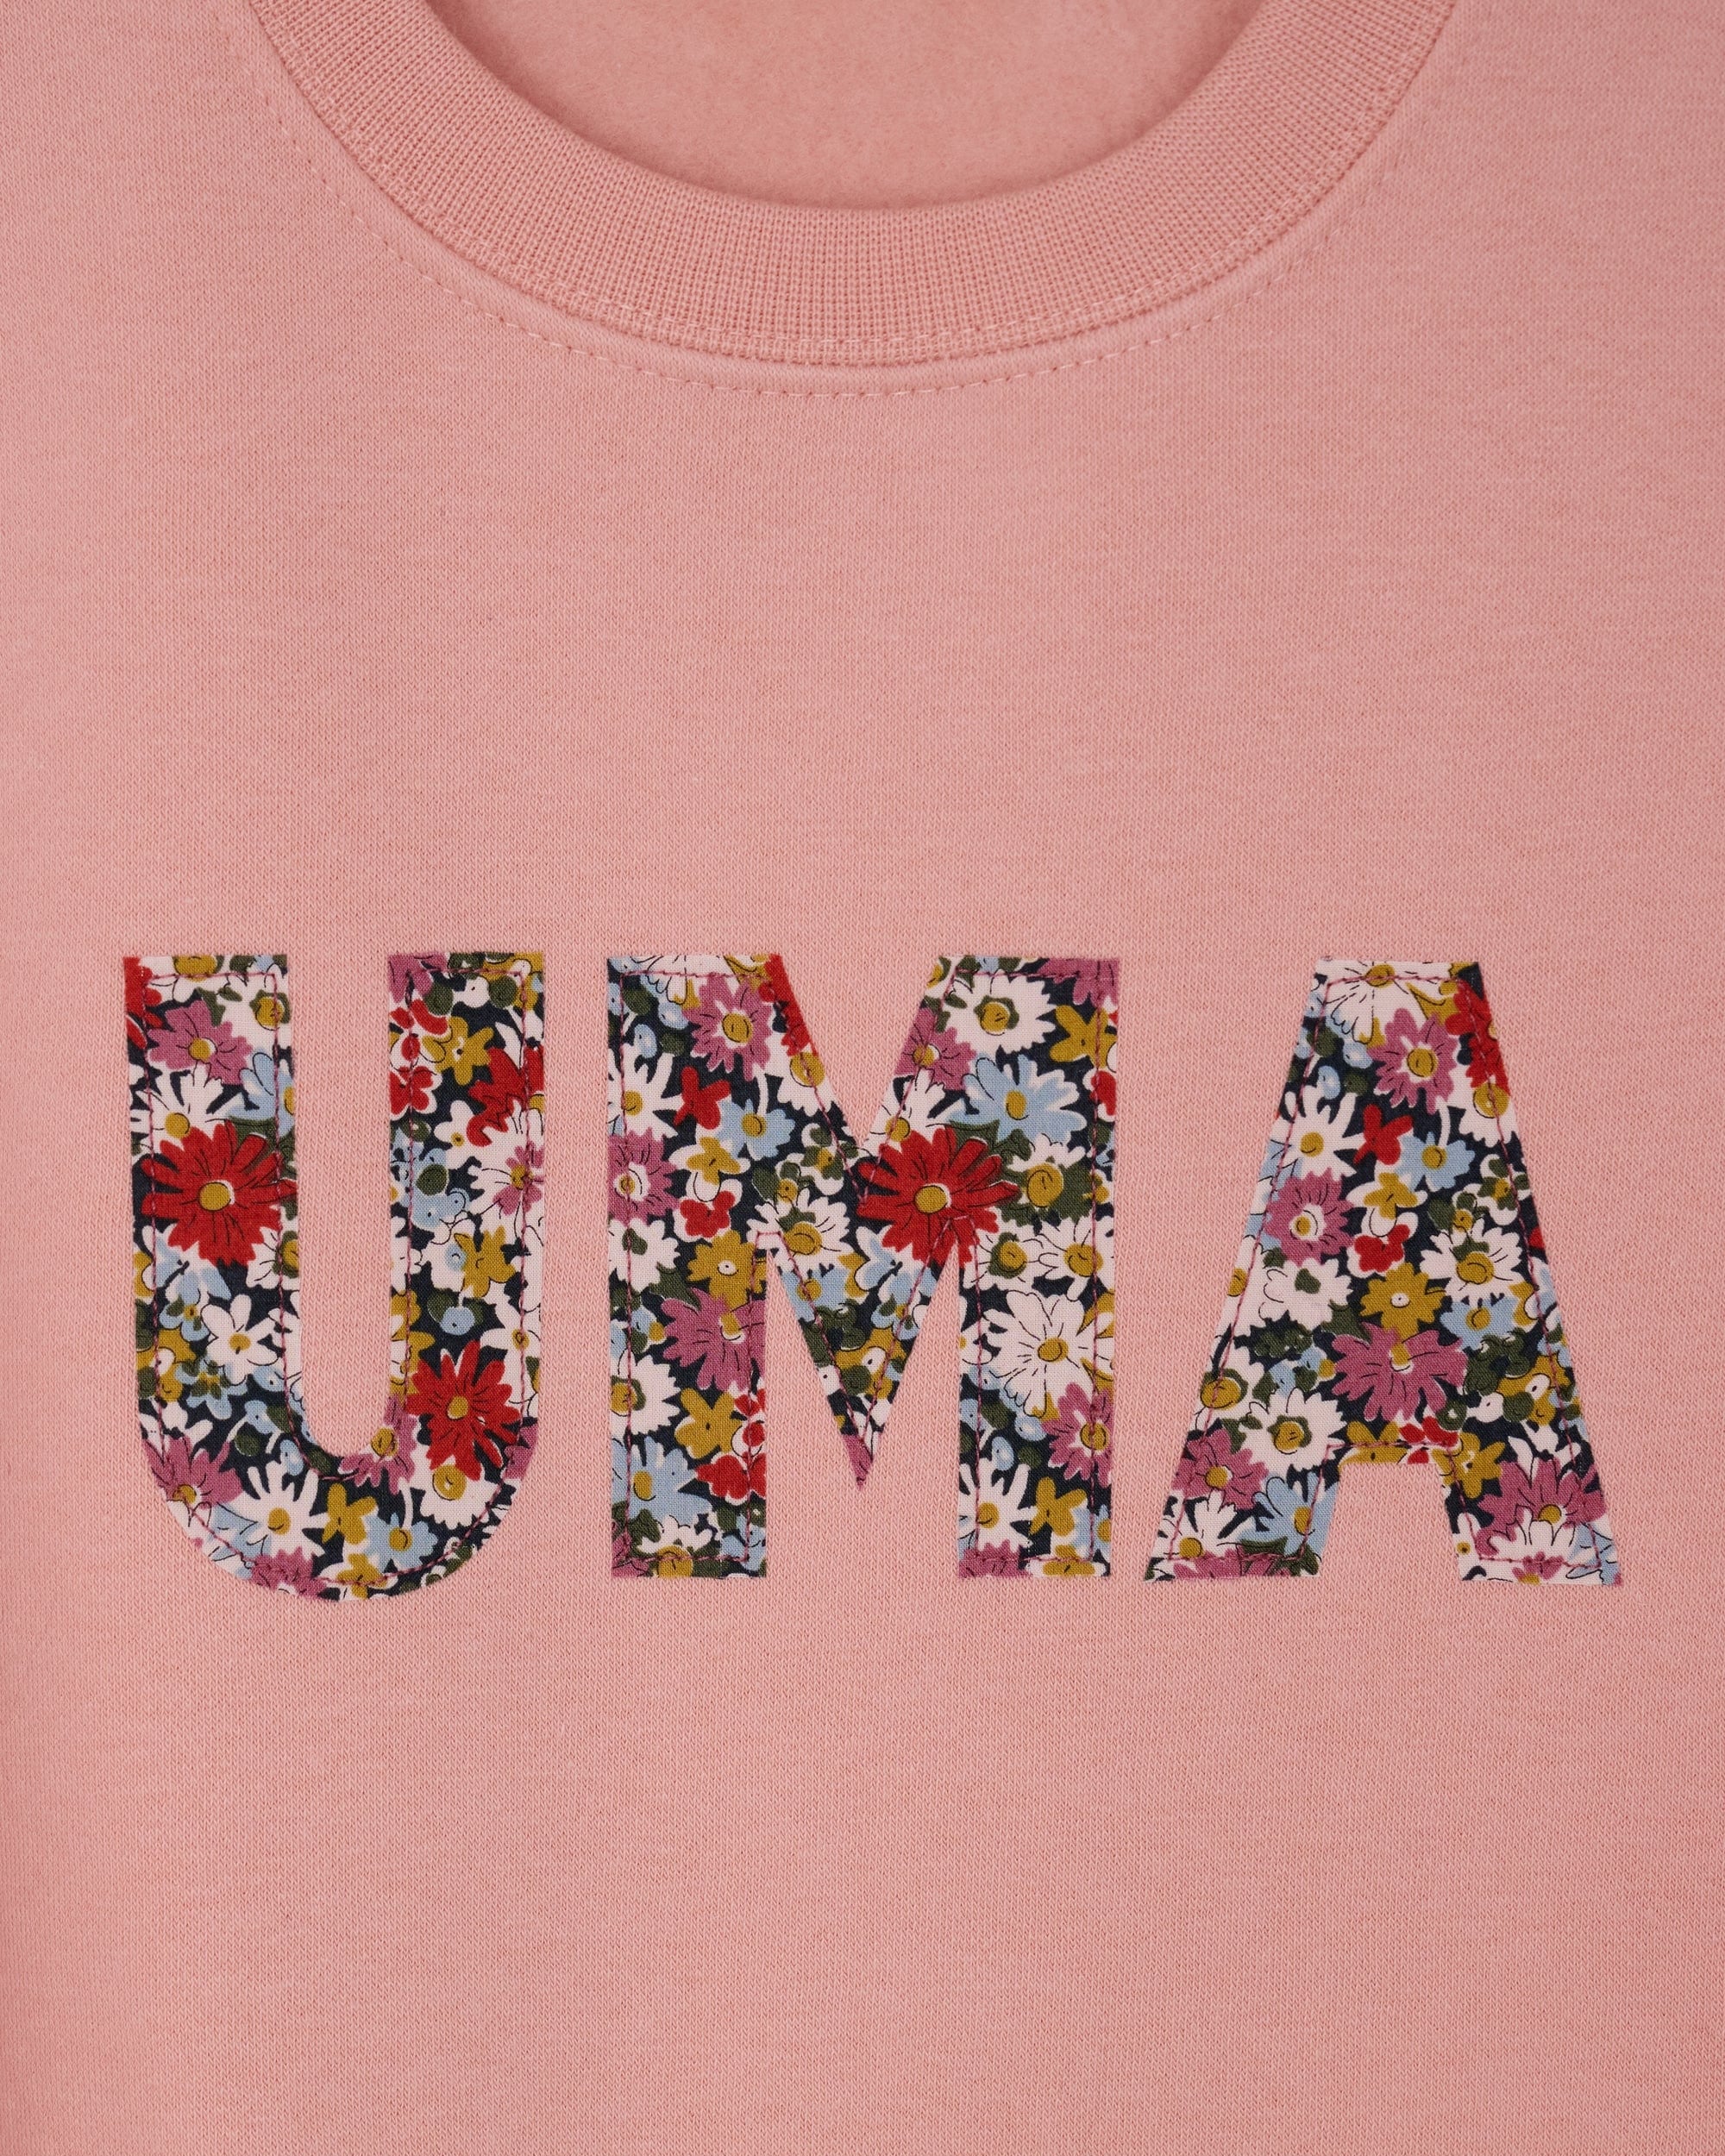 Magnificent Stanley sweatshirt Dusty Pink Name Sweatshirt in Choice of Liberty Print